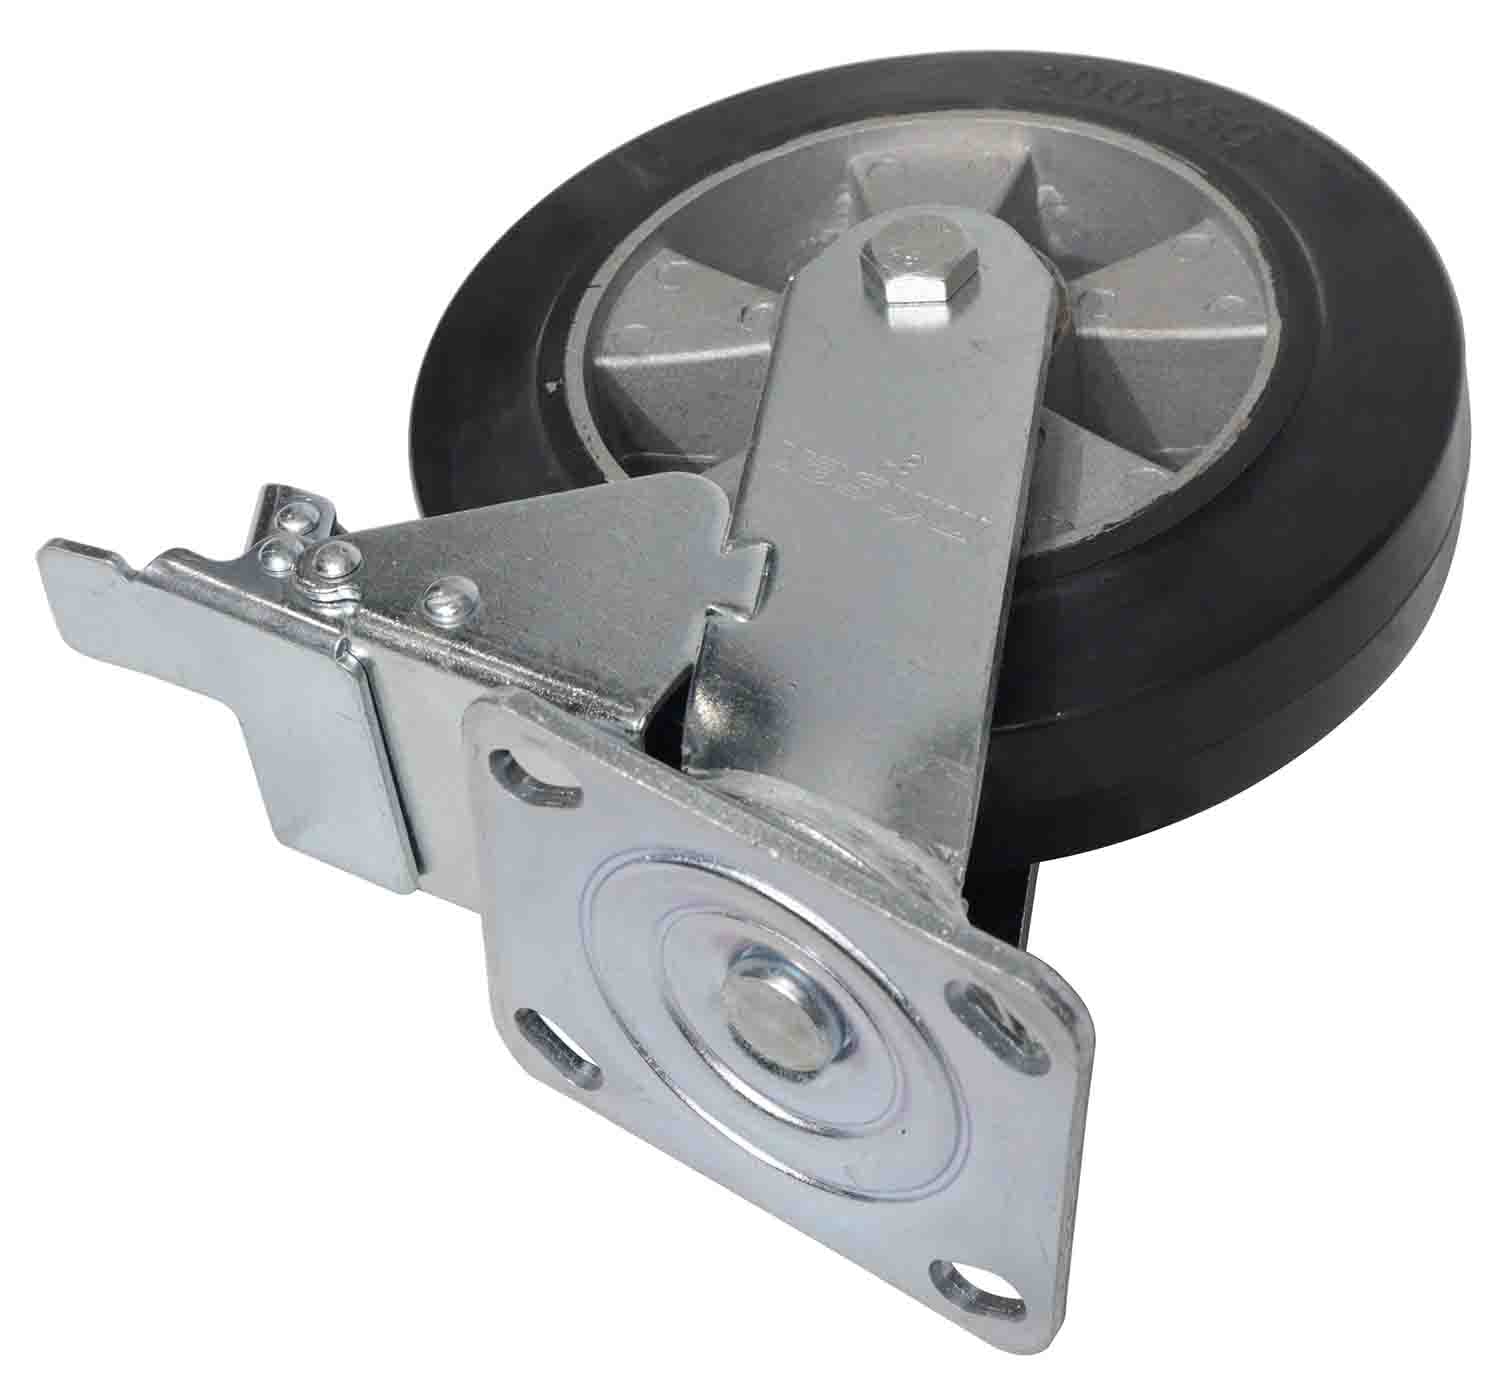 Prox X-CASTER-8-GR 8-inch Replacement Locking Caster - 4.5 x 4 inch Plate - Hollywood DJ